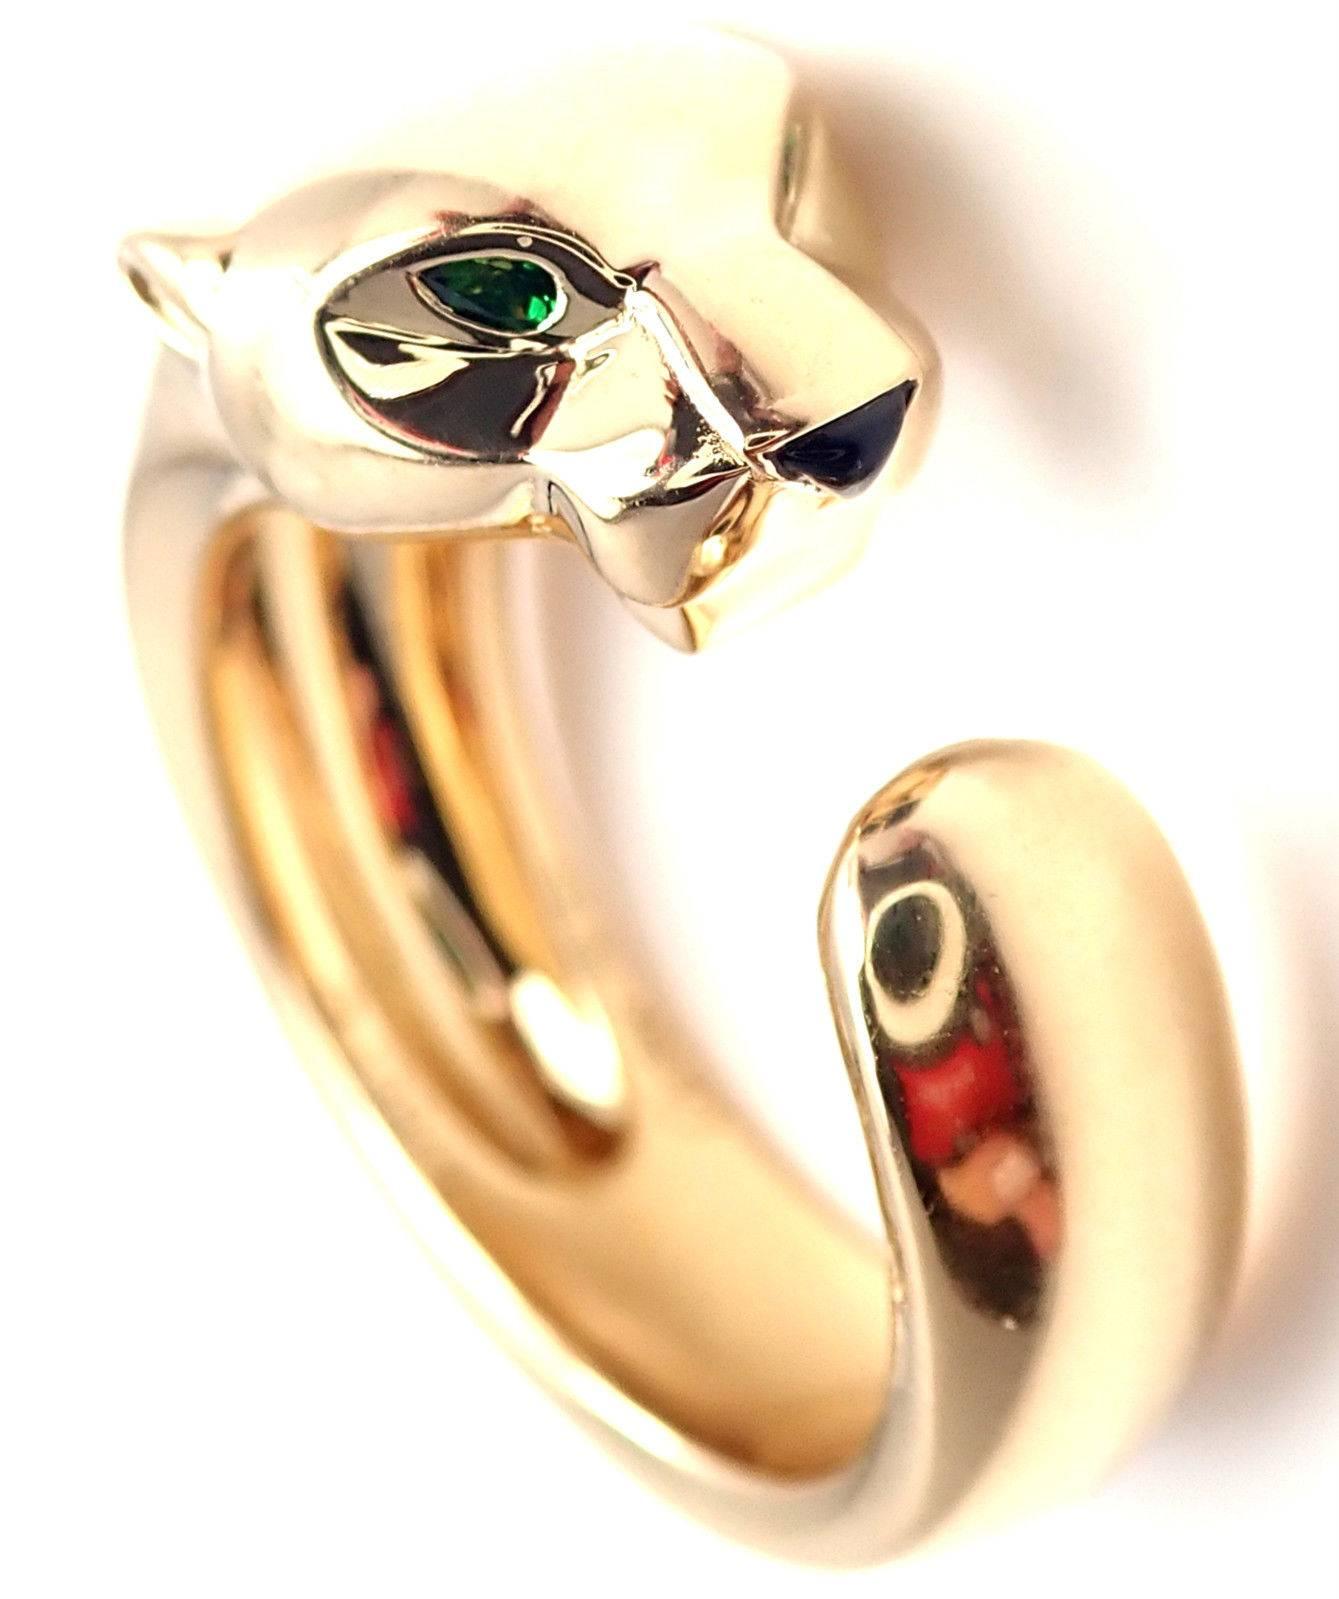 18k Yellow Gold Tsavorite Garnet and Onyx Panther Panthere Ring by Cartier. 
Part of the Panthere collection. 
With 2 small tsavorite garnets in the eyes
1 black onyx in the nose
This ring comes with original Cartier box.
Details: 
Ring Size: